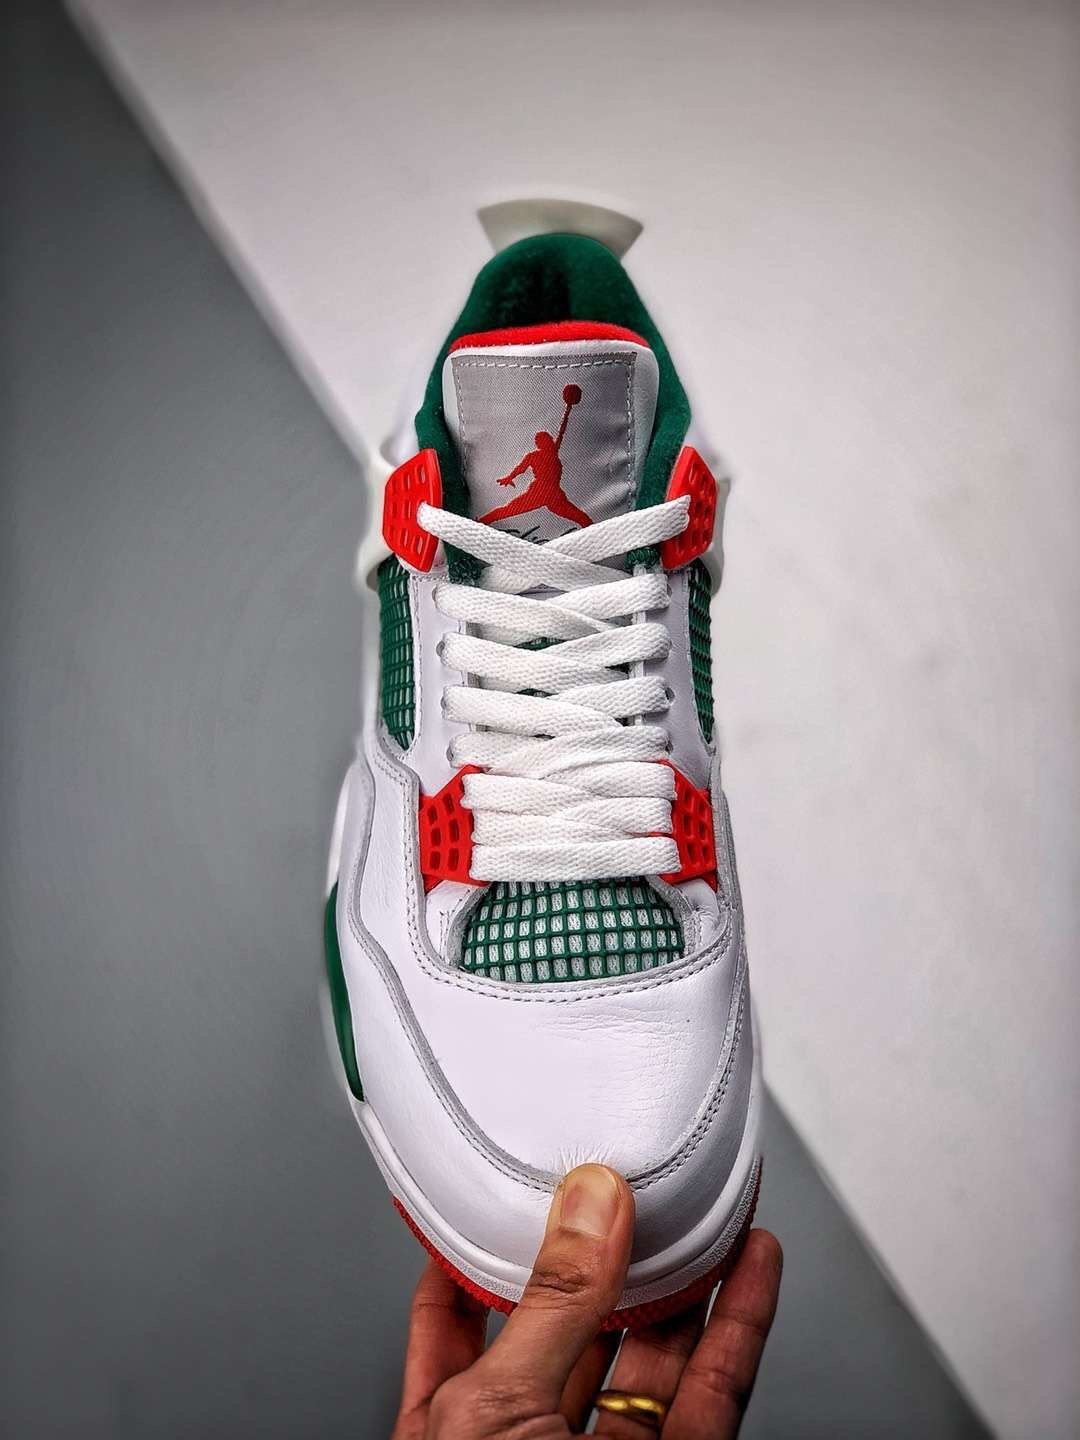 Air Jordan 4 Retro Do The Right Thing White Gorge Green-Varsity Red For Sale